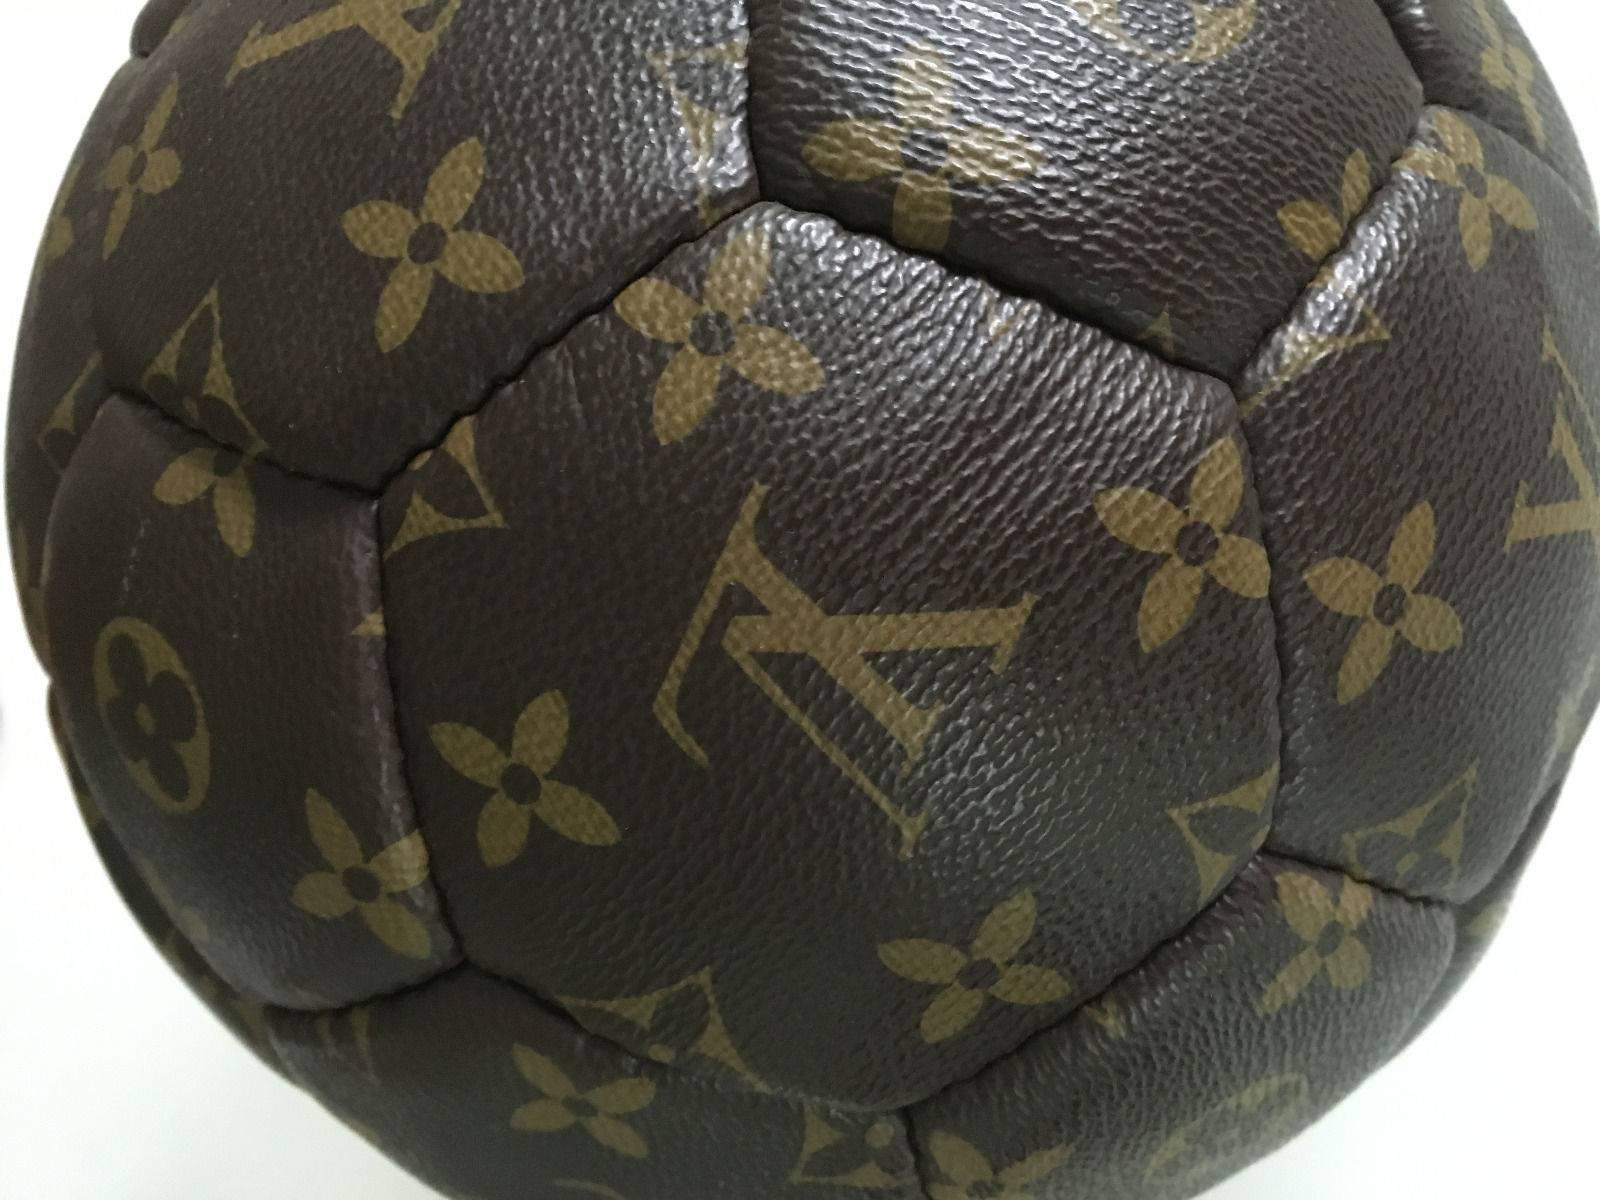 Nice Louis Vuitton limited edition football ball from 